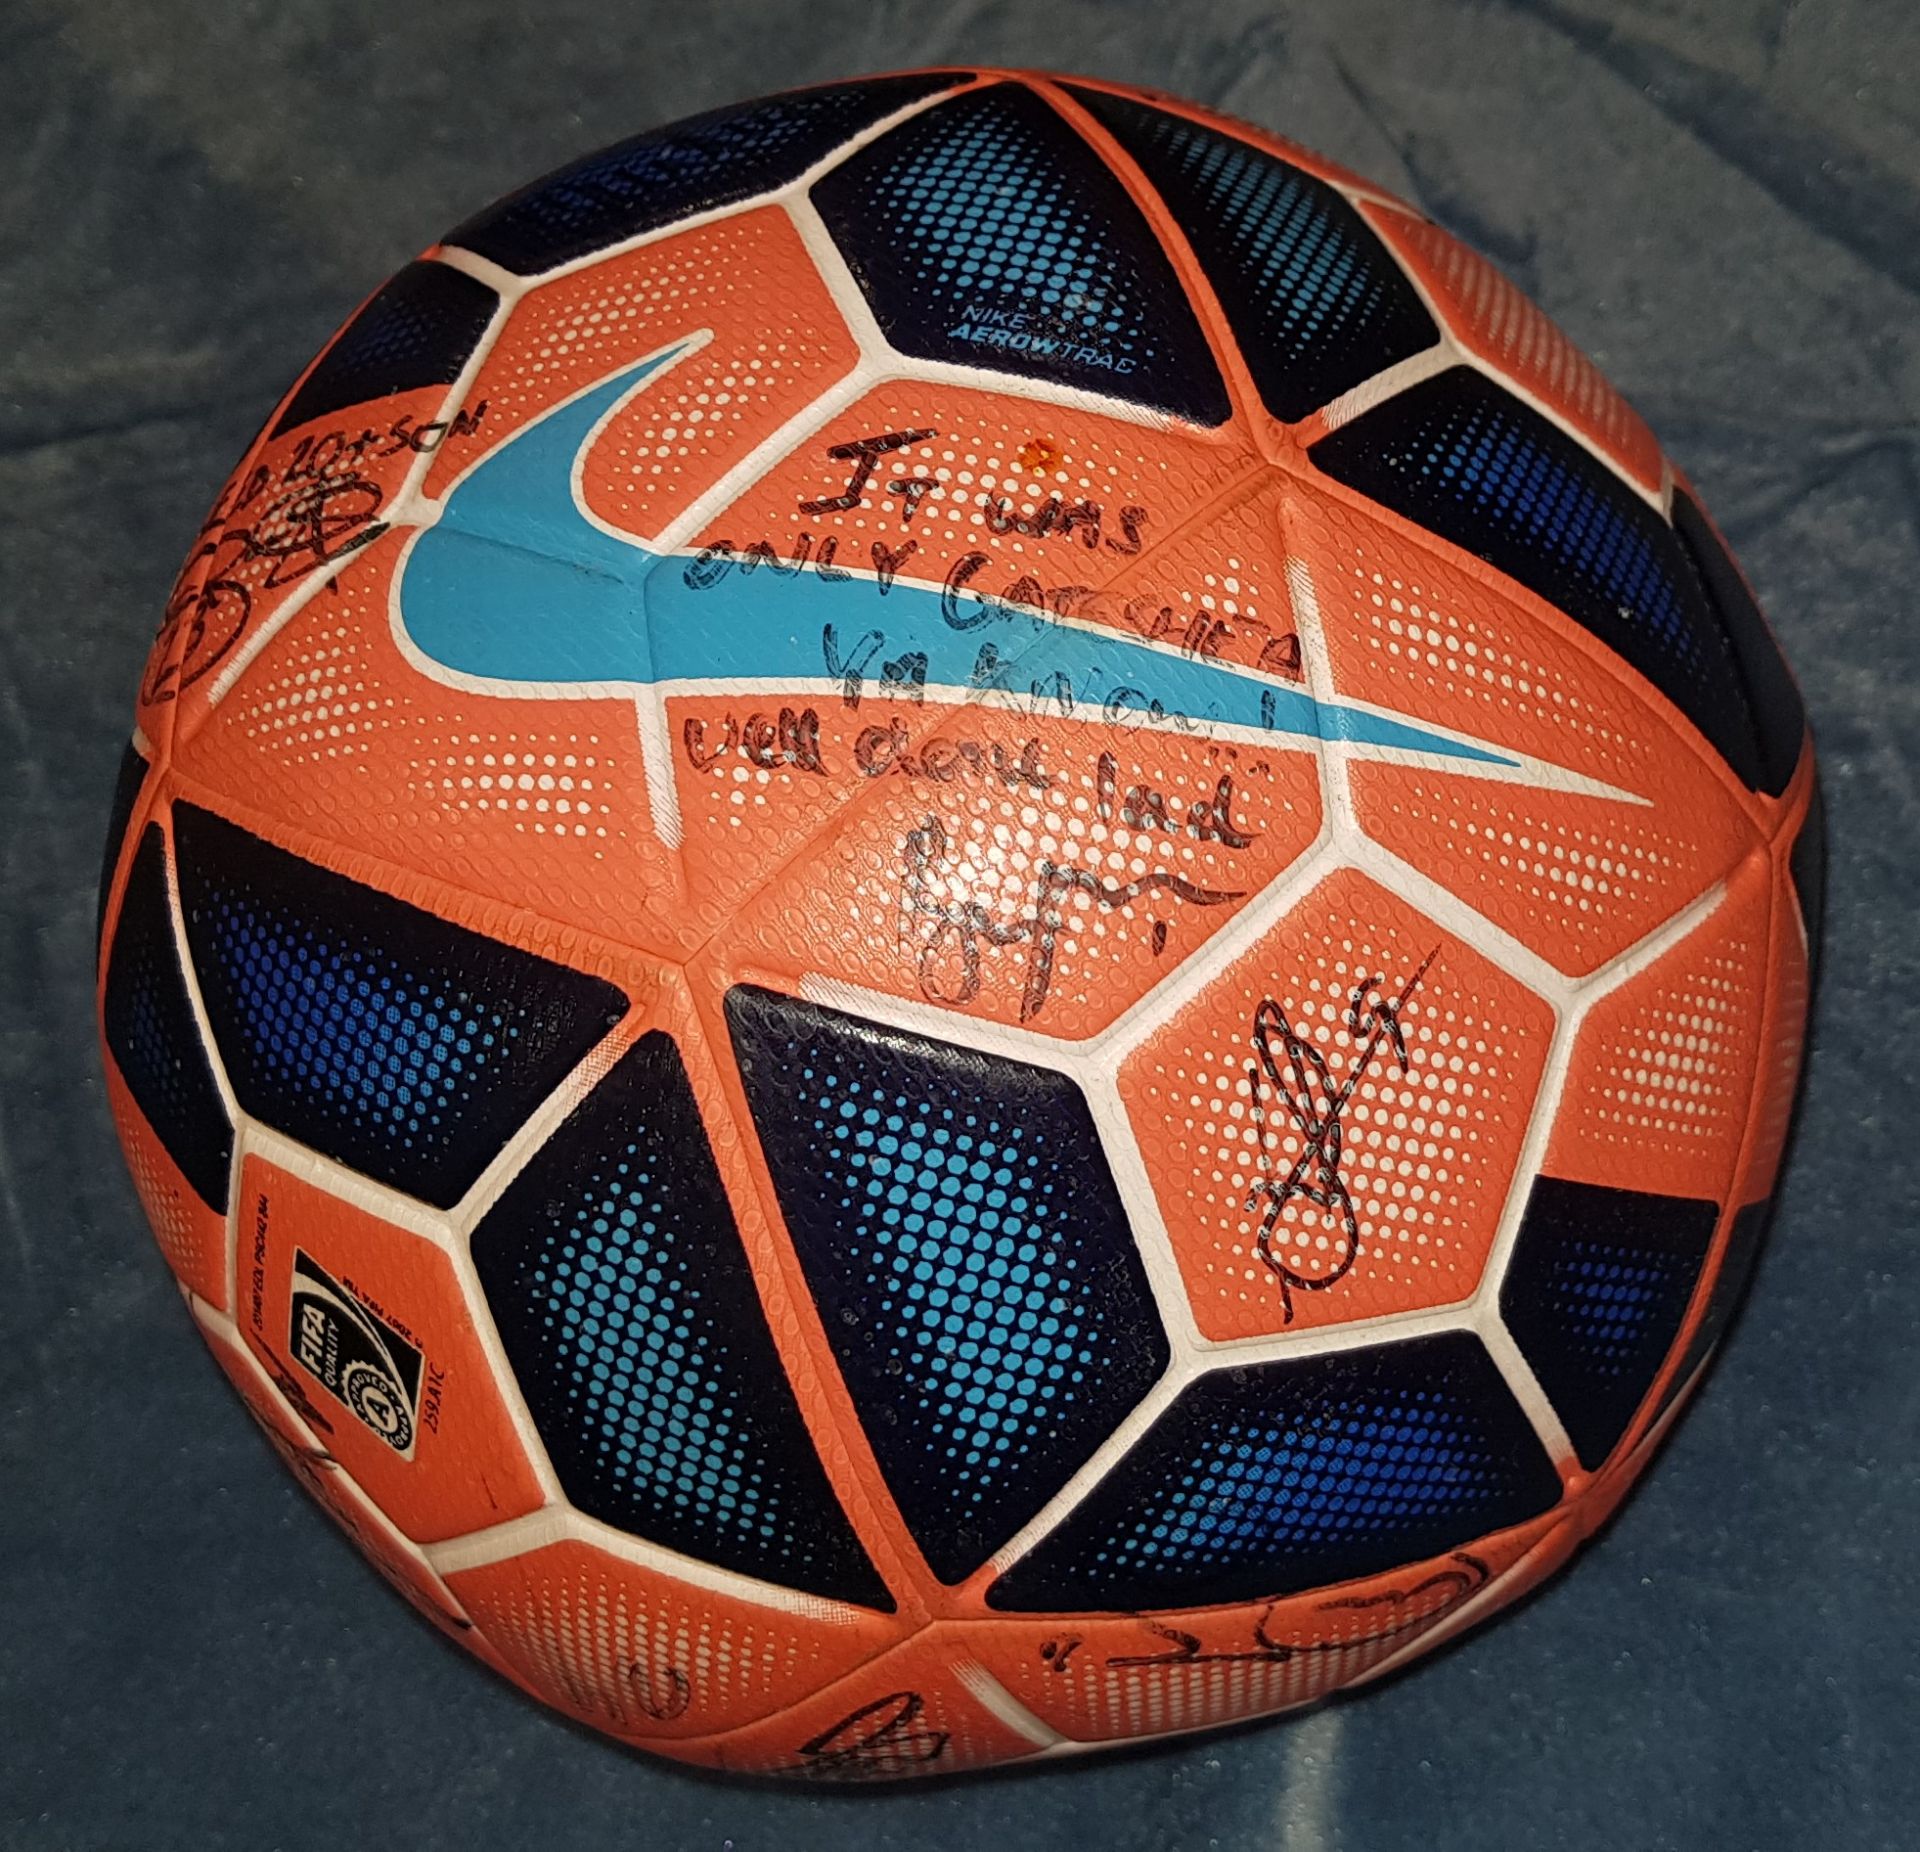 NIKE ORDEM THE FA CUP OFFICIAL MATCH BALL WITH NUMEROUS UNKNOWN SIGNATURES (SEE IMAGES) - Image 2 of 4